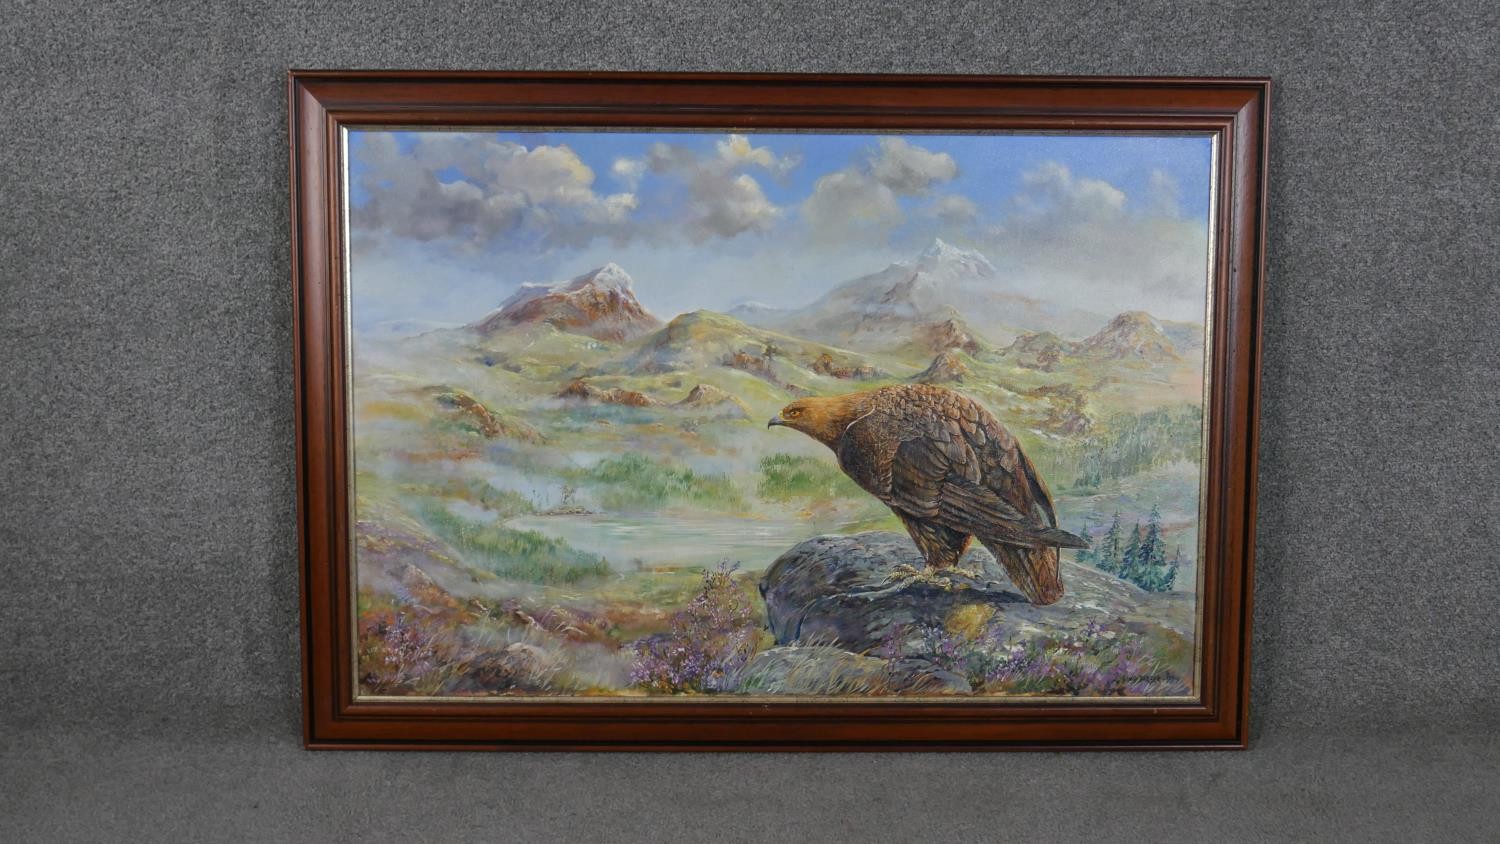 David Barber (Late 20th century school) observant eagle, oil on canvas, signed and dated '99 lower - Image 2 of 6